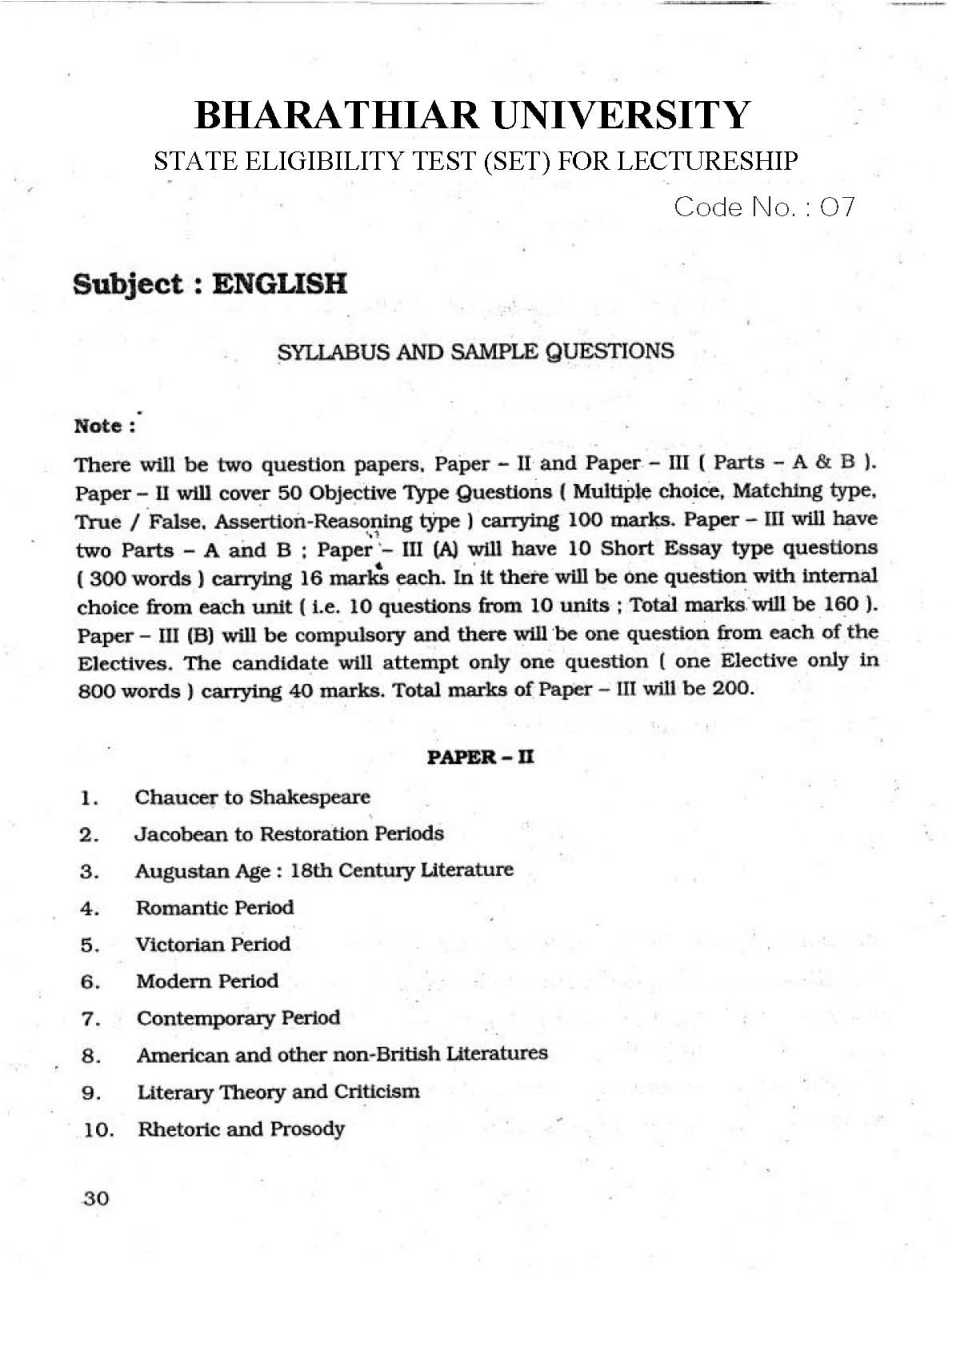 check list for synopsis thesis submission bharathiar university